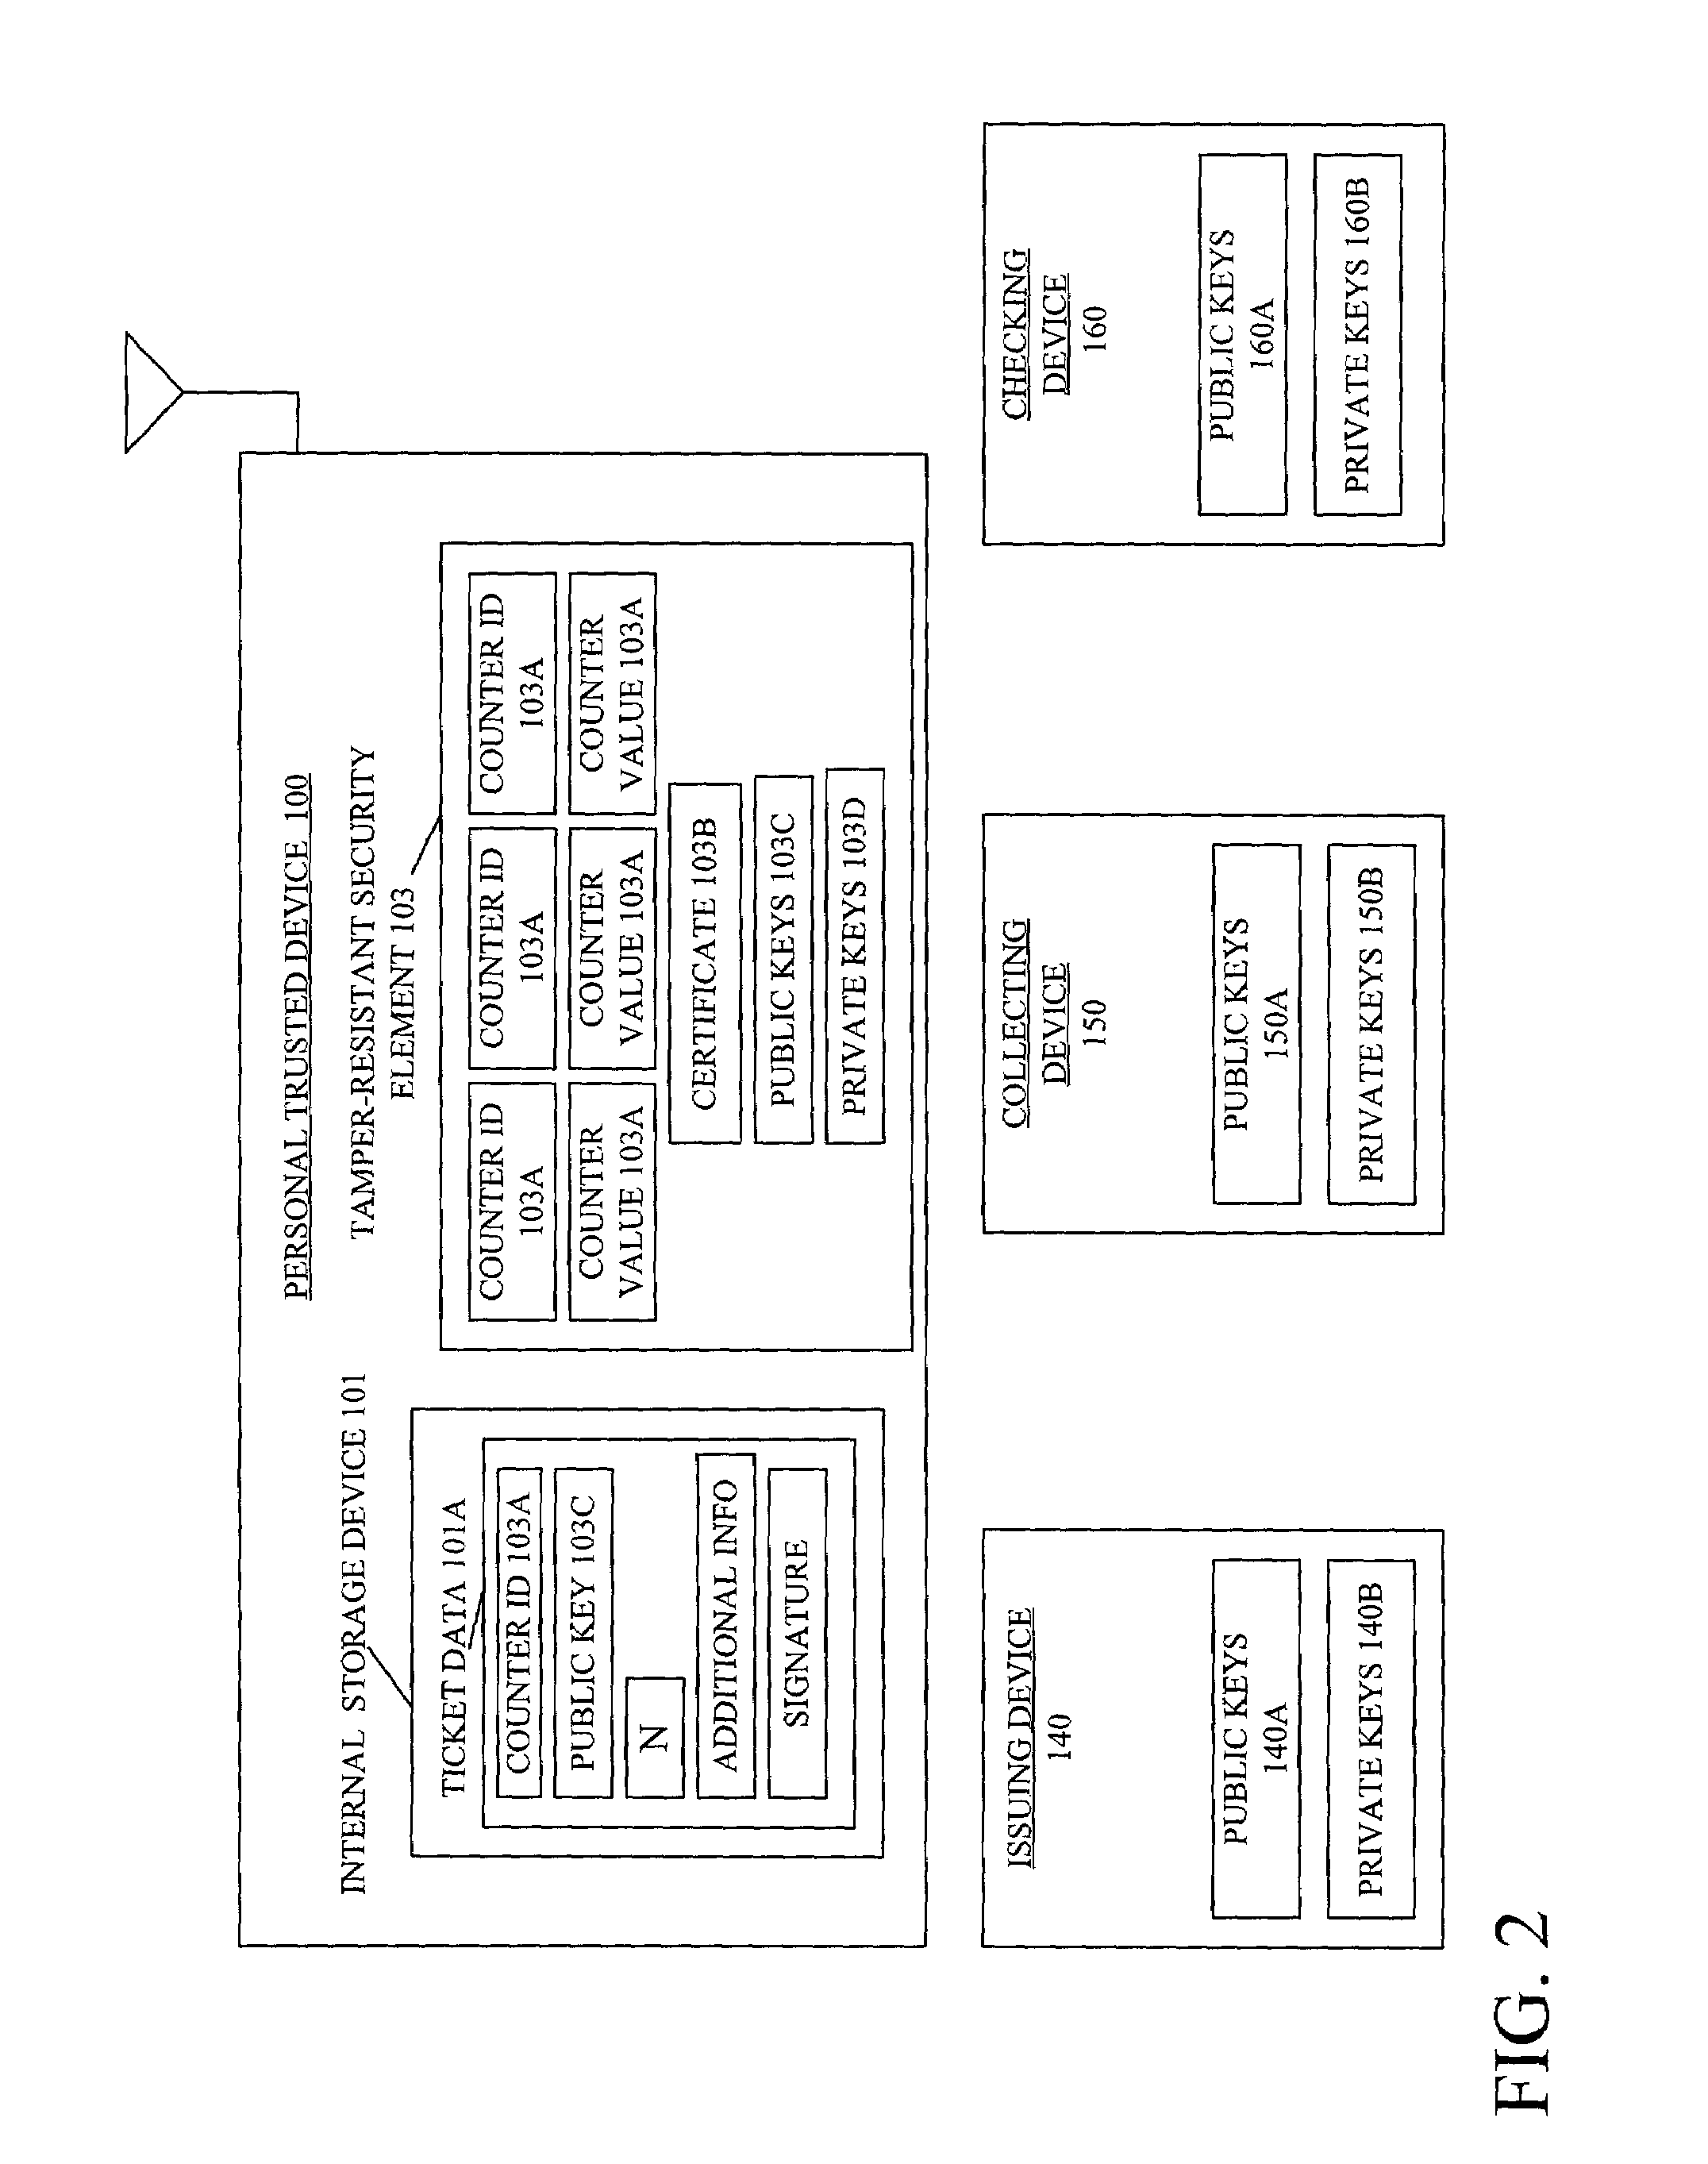 Method, system and computer program product for secure ticketing in a communications device